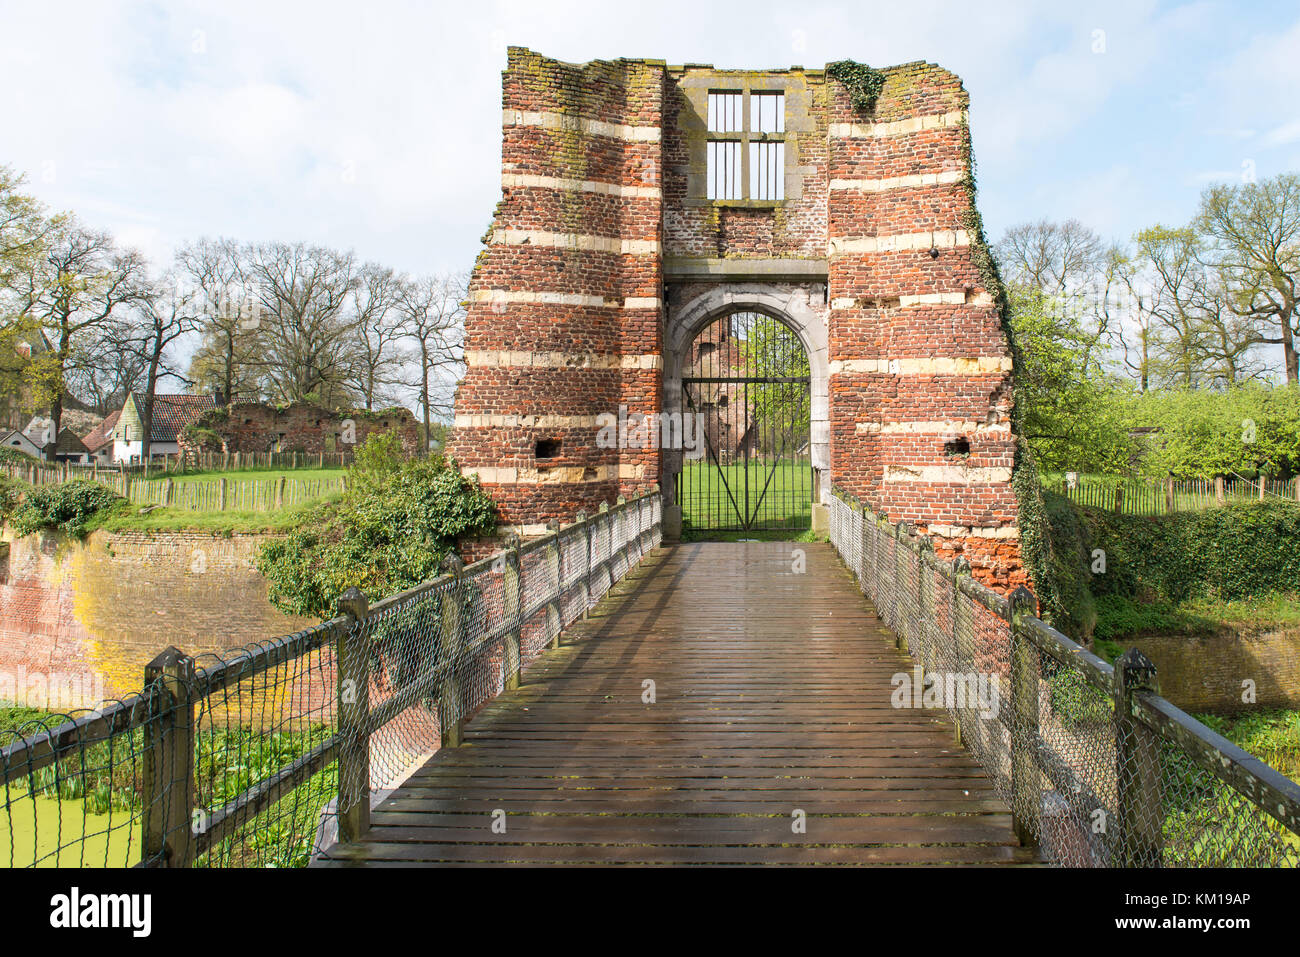 Gate of a medieval castle ruins. Stock Photo